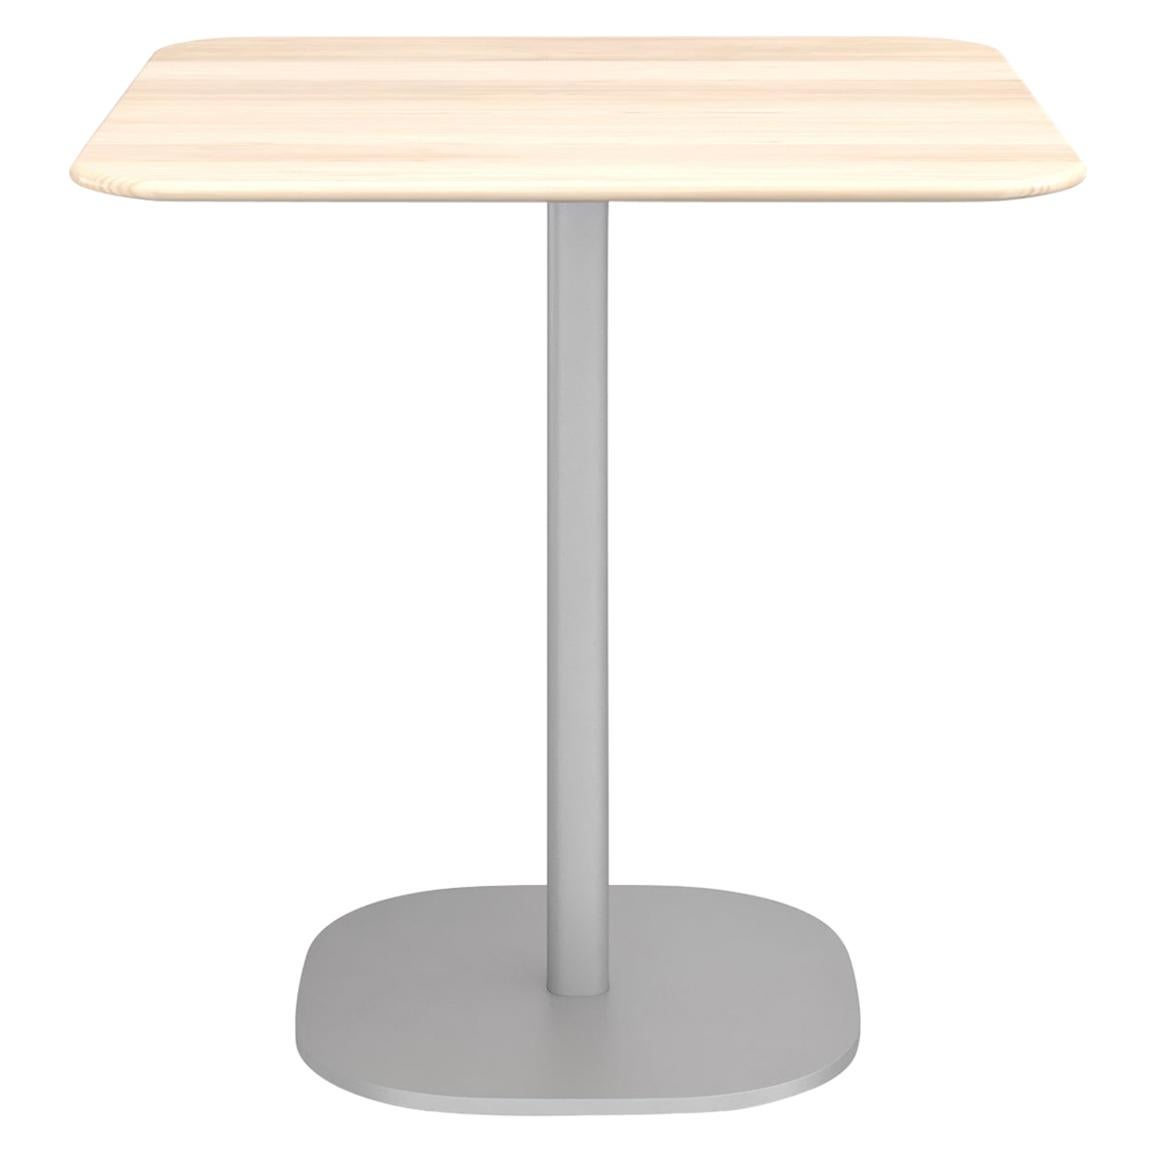 Emeco 2 Inch Large Cafe Table with Aluminum Legs & Wood Top by Jasper Morrison For Sale